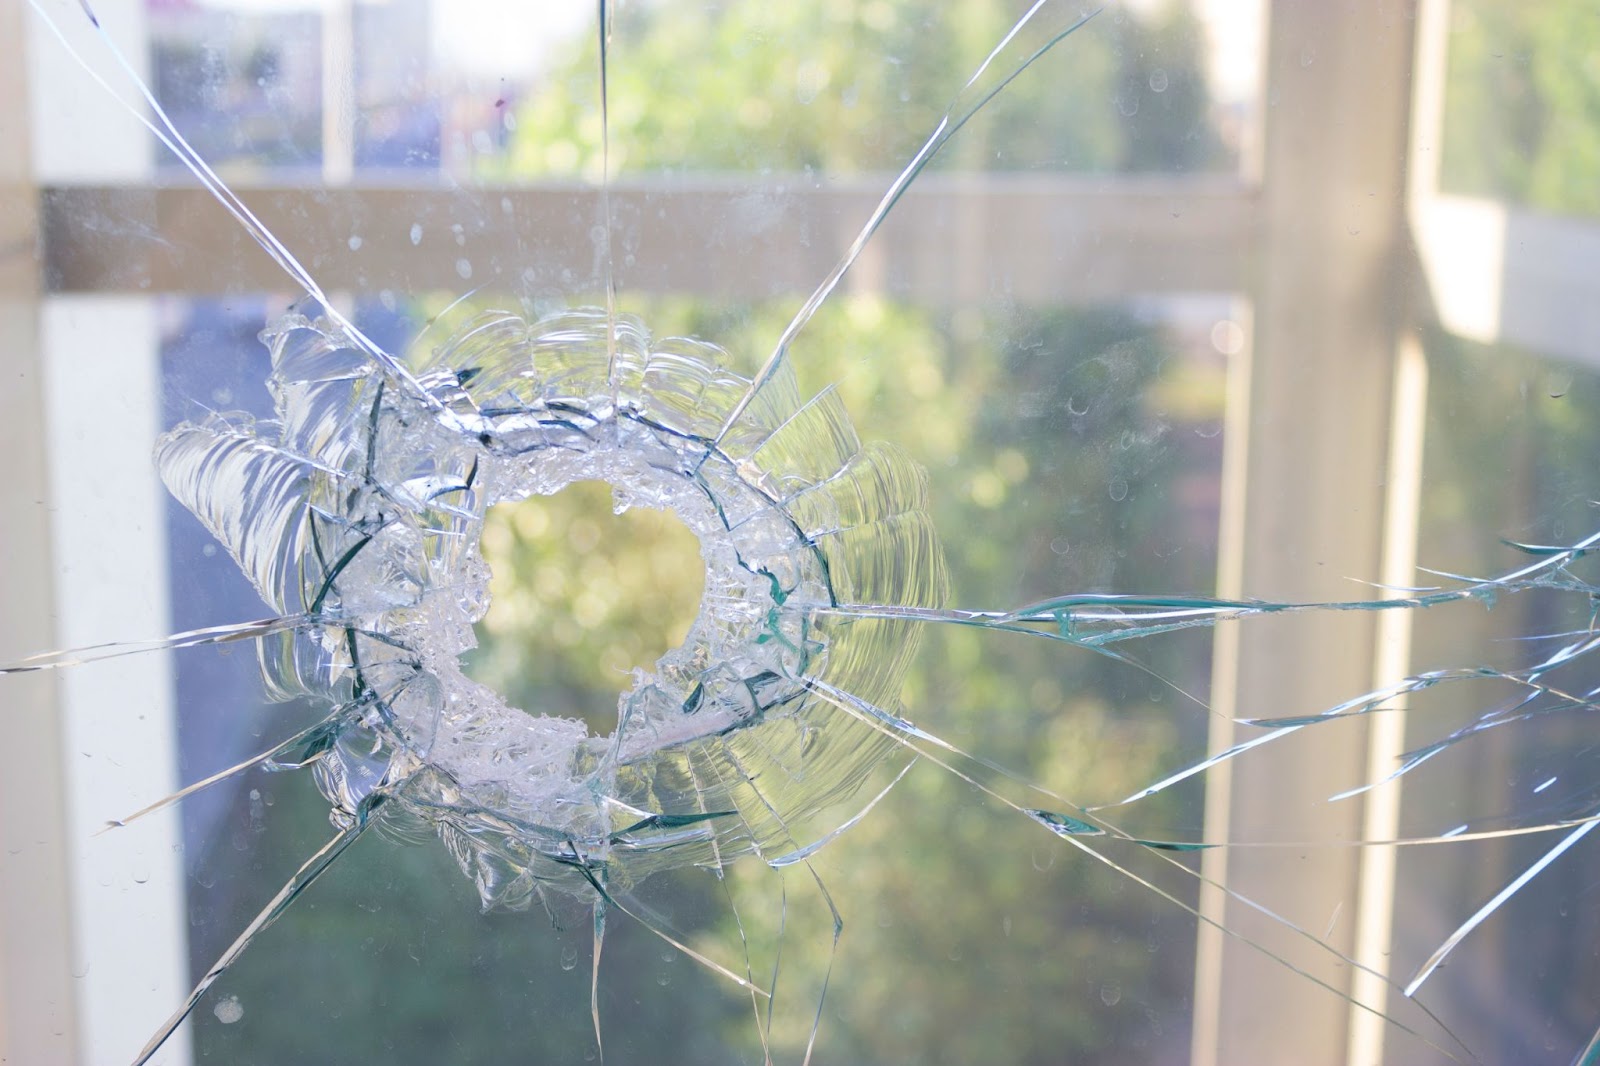 A broken window with a bullet hole, showing window damage in the home.